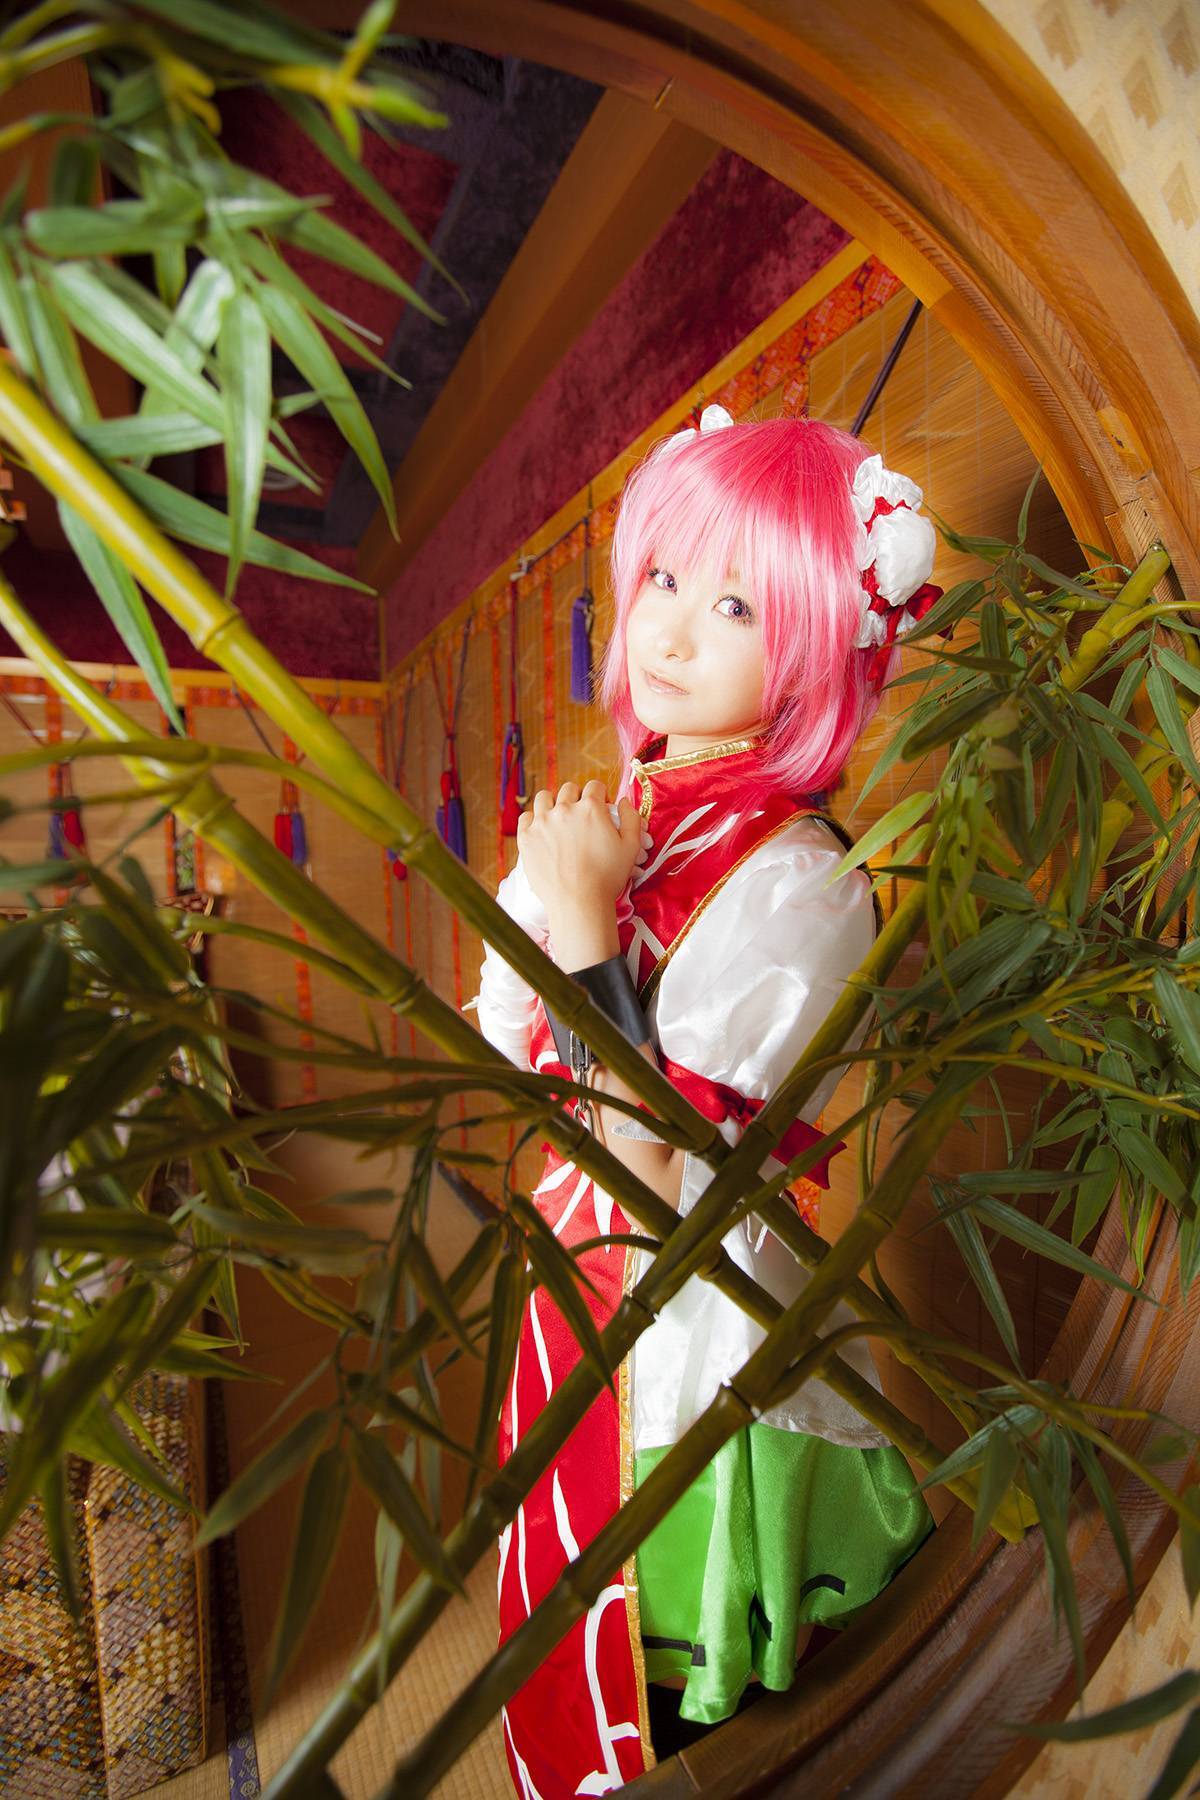 [Cosplay] New Touhou Project Cosplay set - Awesome Kasen Ibara